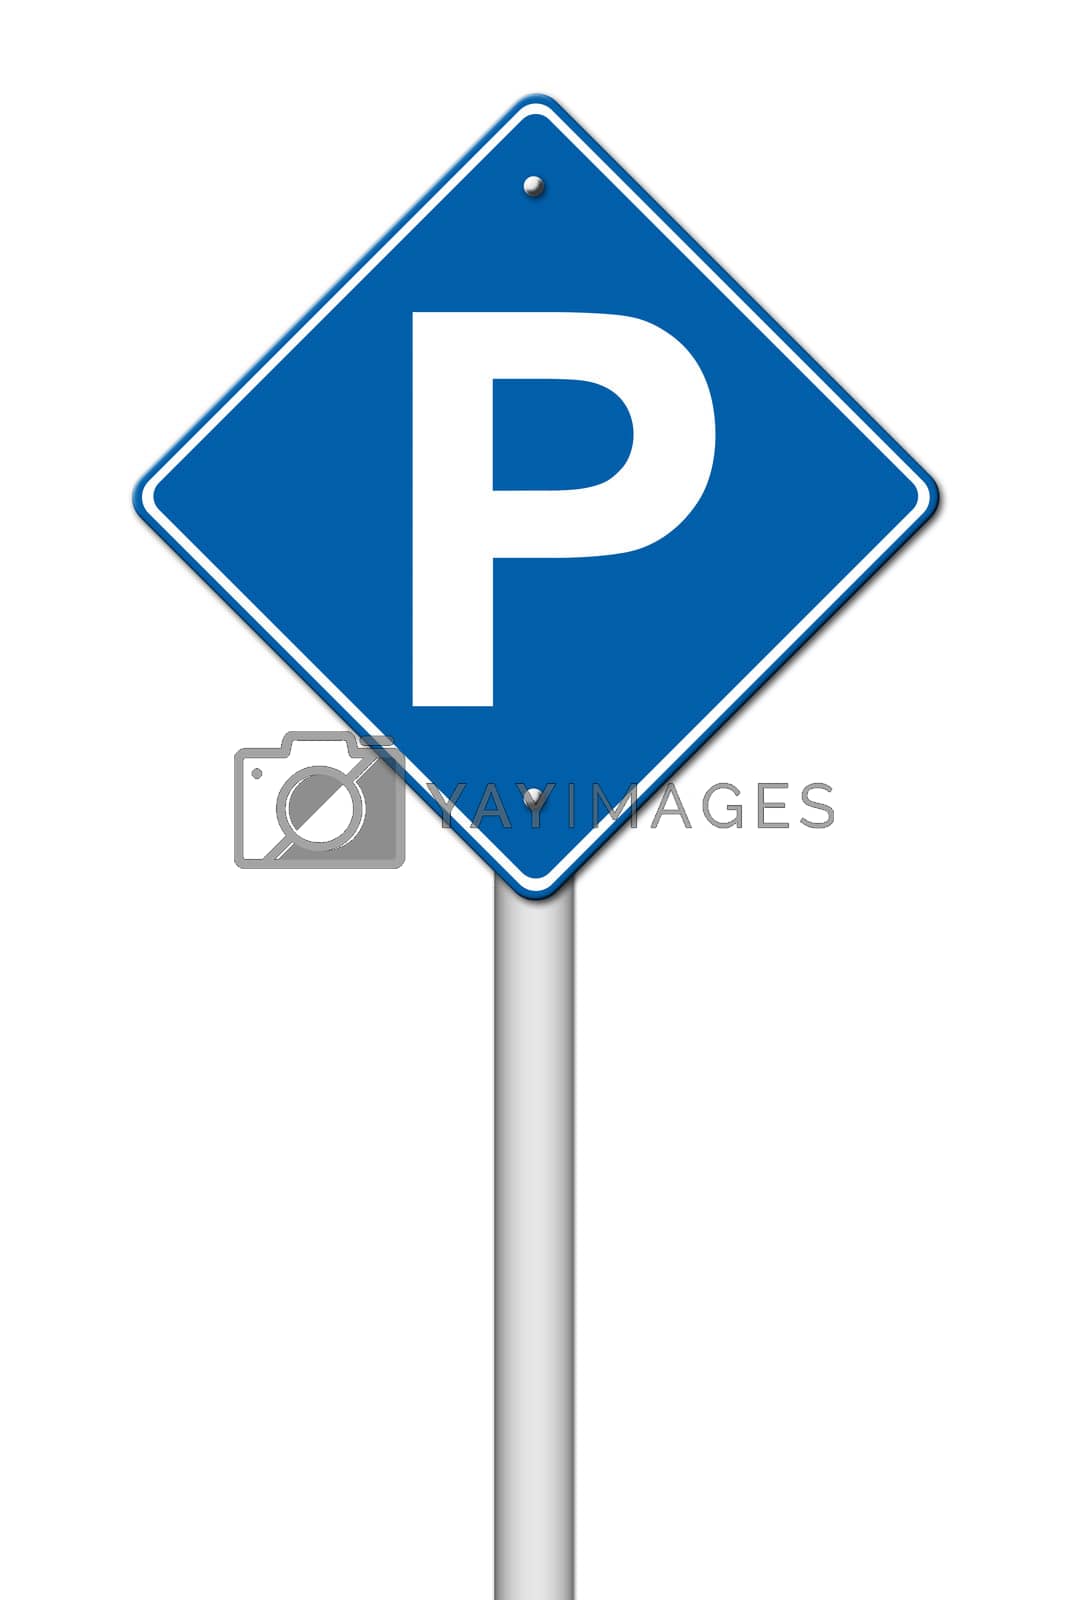 Royalty free image of Parking traffic sign by geargodz